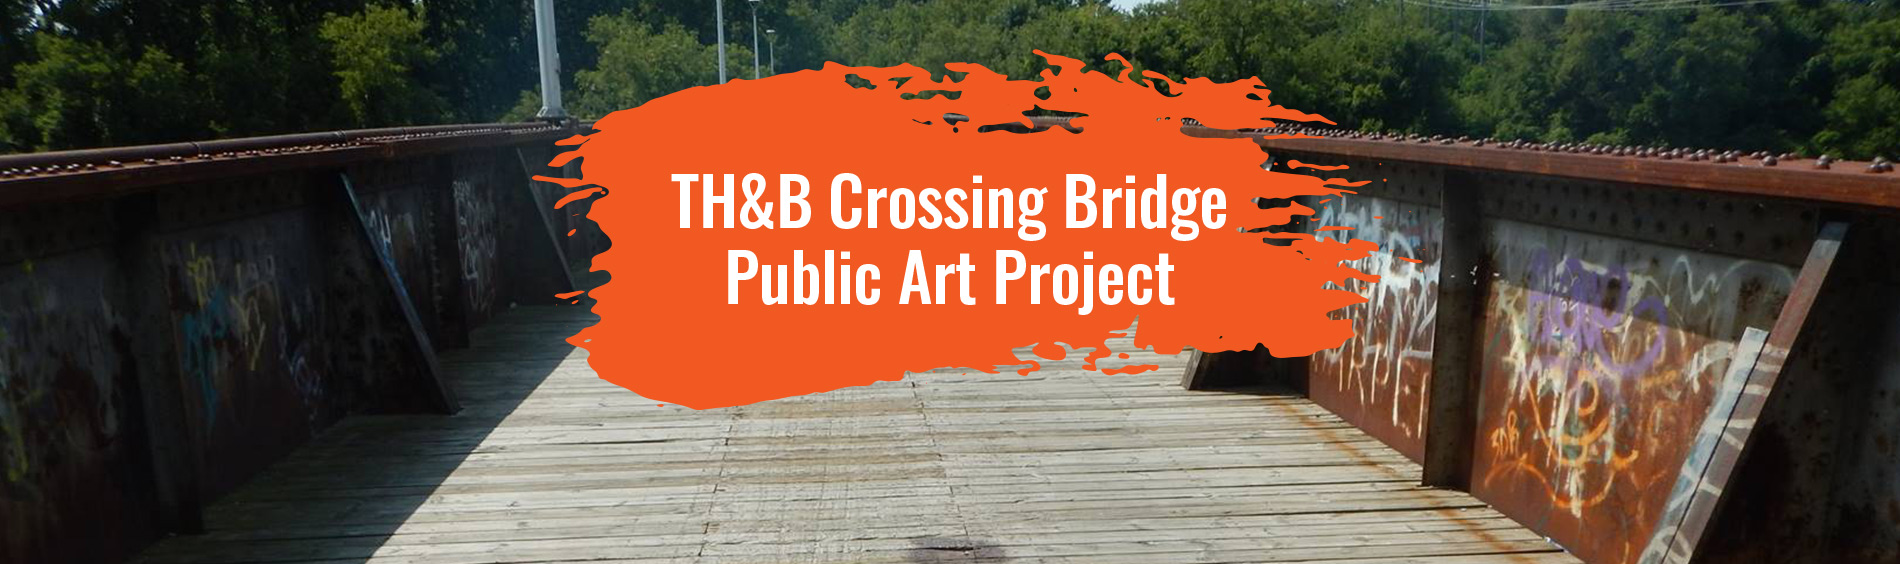 TH&B Crossing with the artwork TH&B Public Art Project